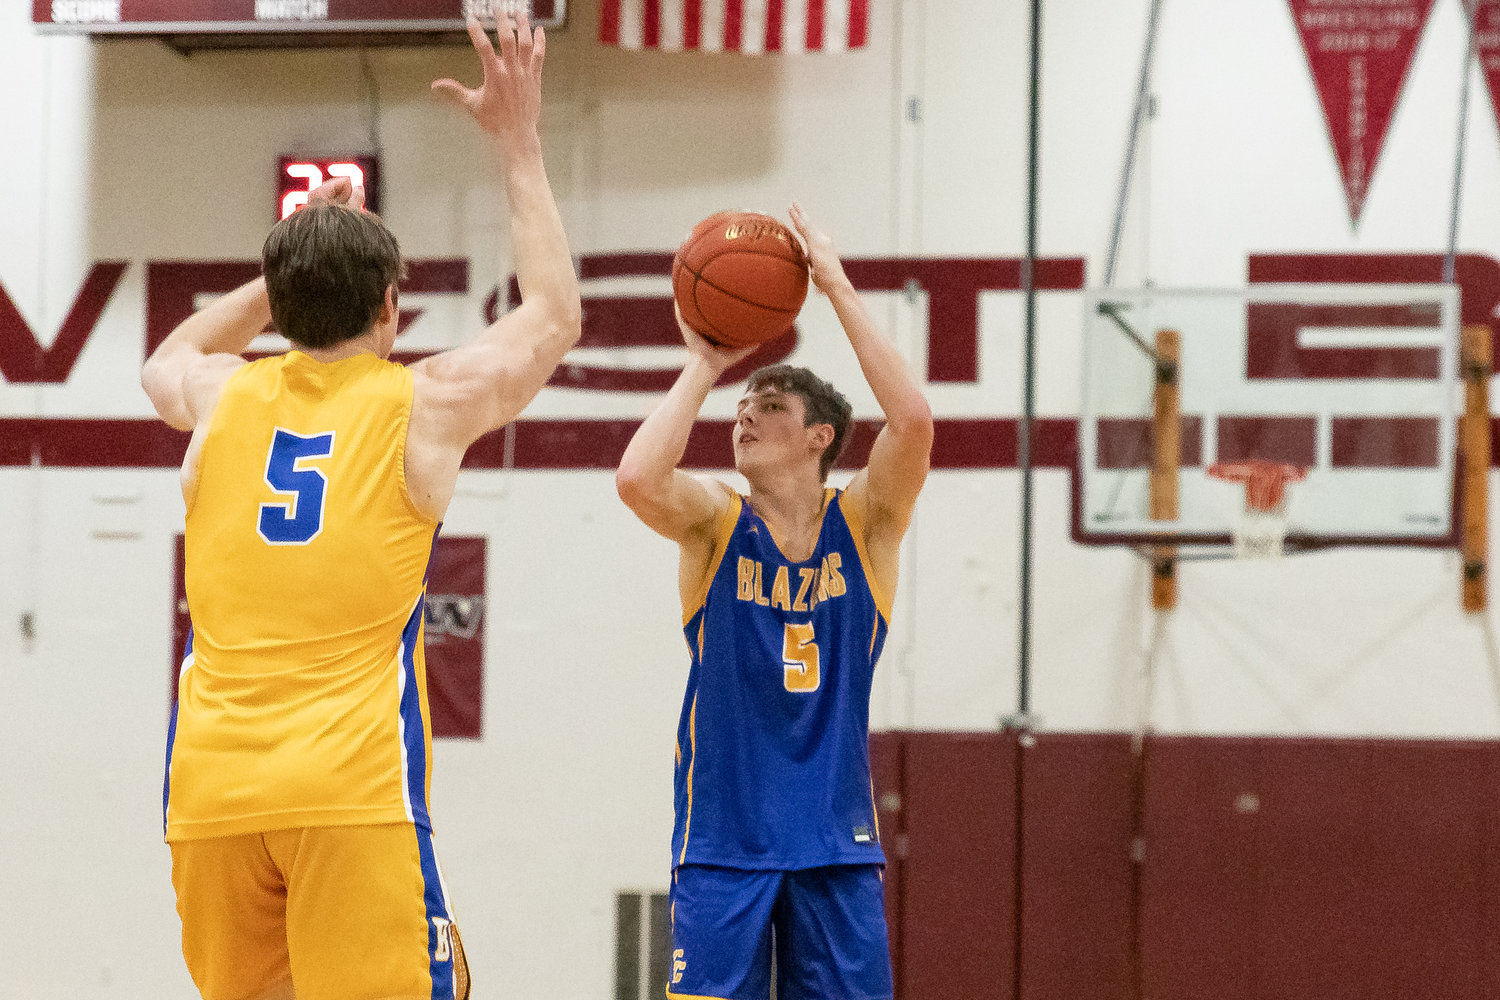 Adna guard Chase Collins looks to shoot a 3-pointer at the SWW Senior All-Star Game March 26 at W.F. West.